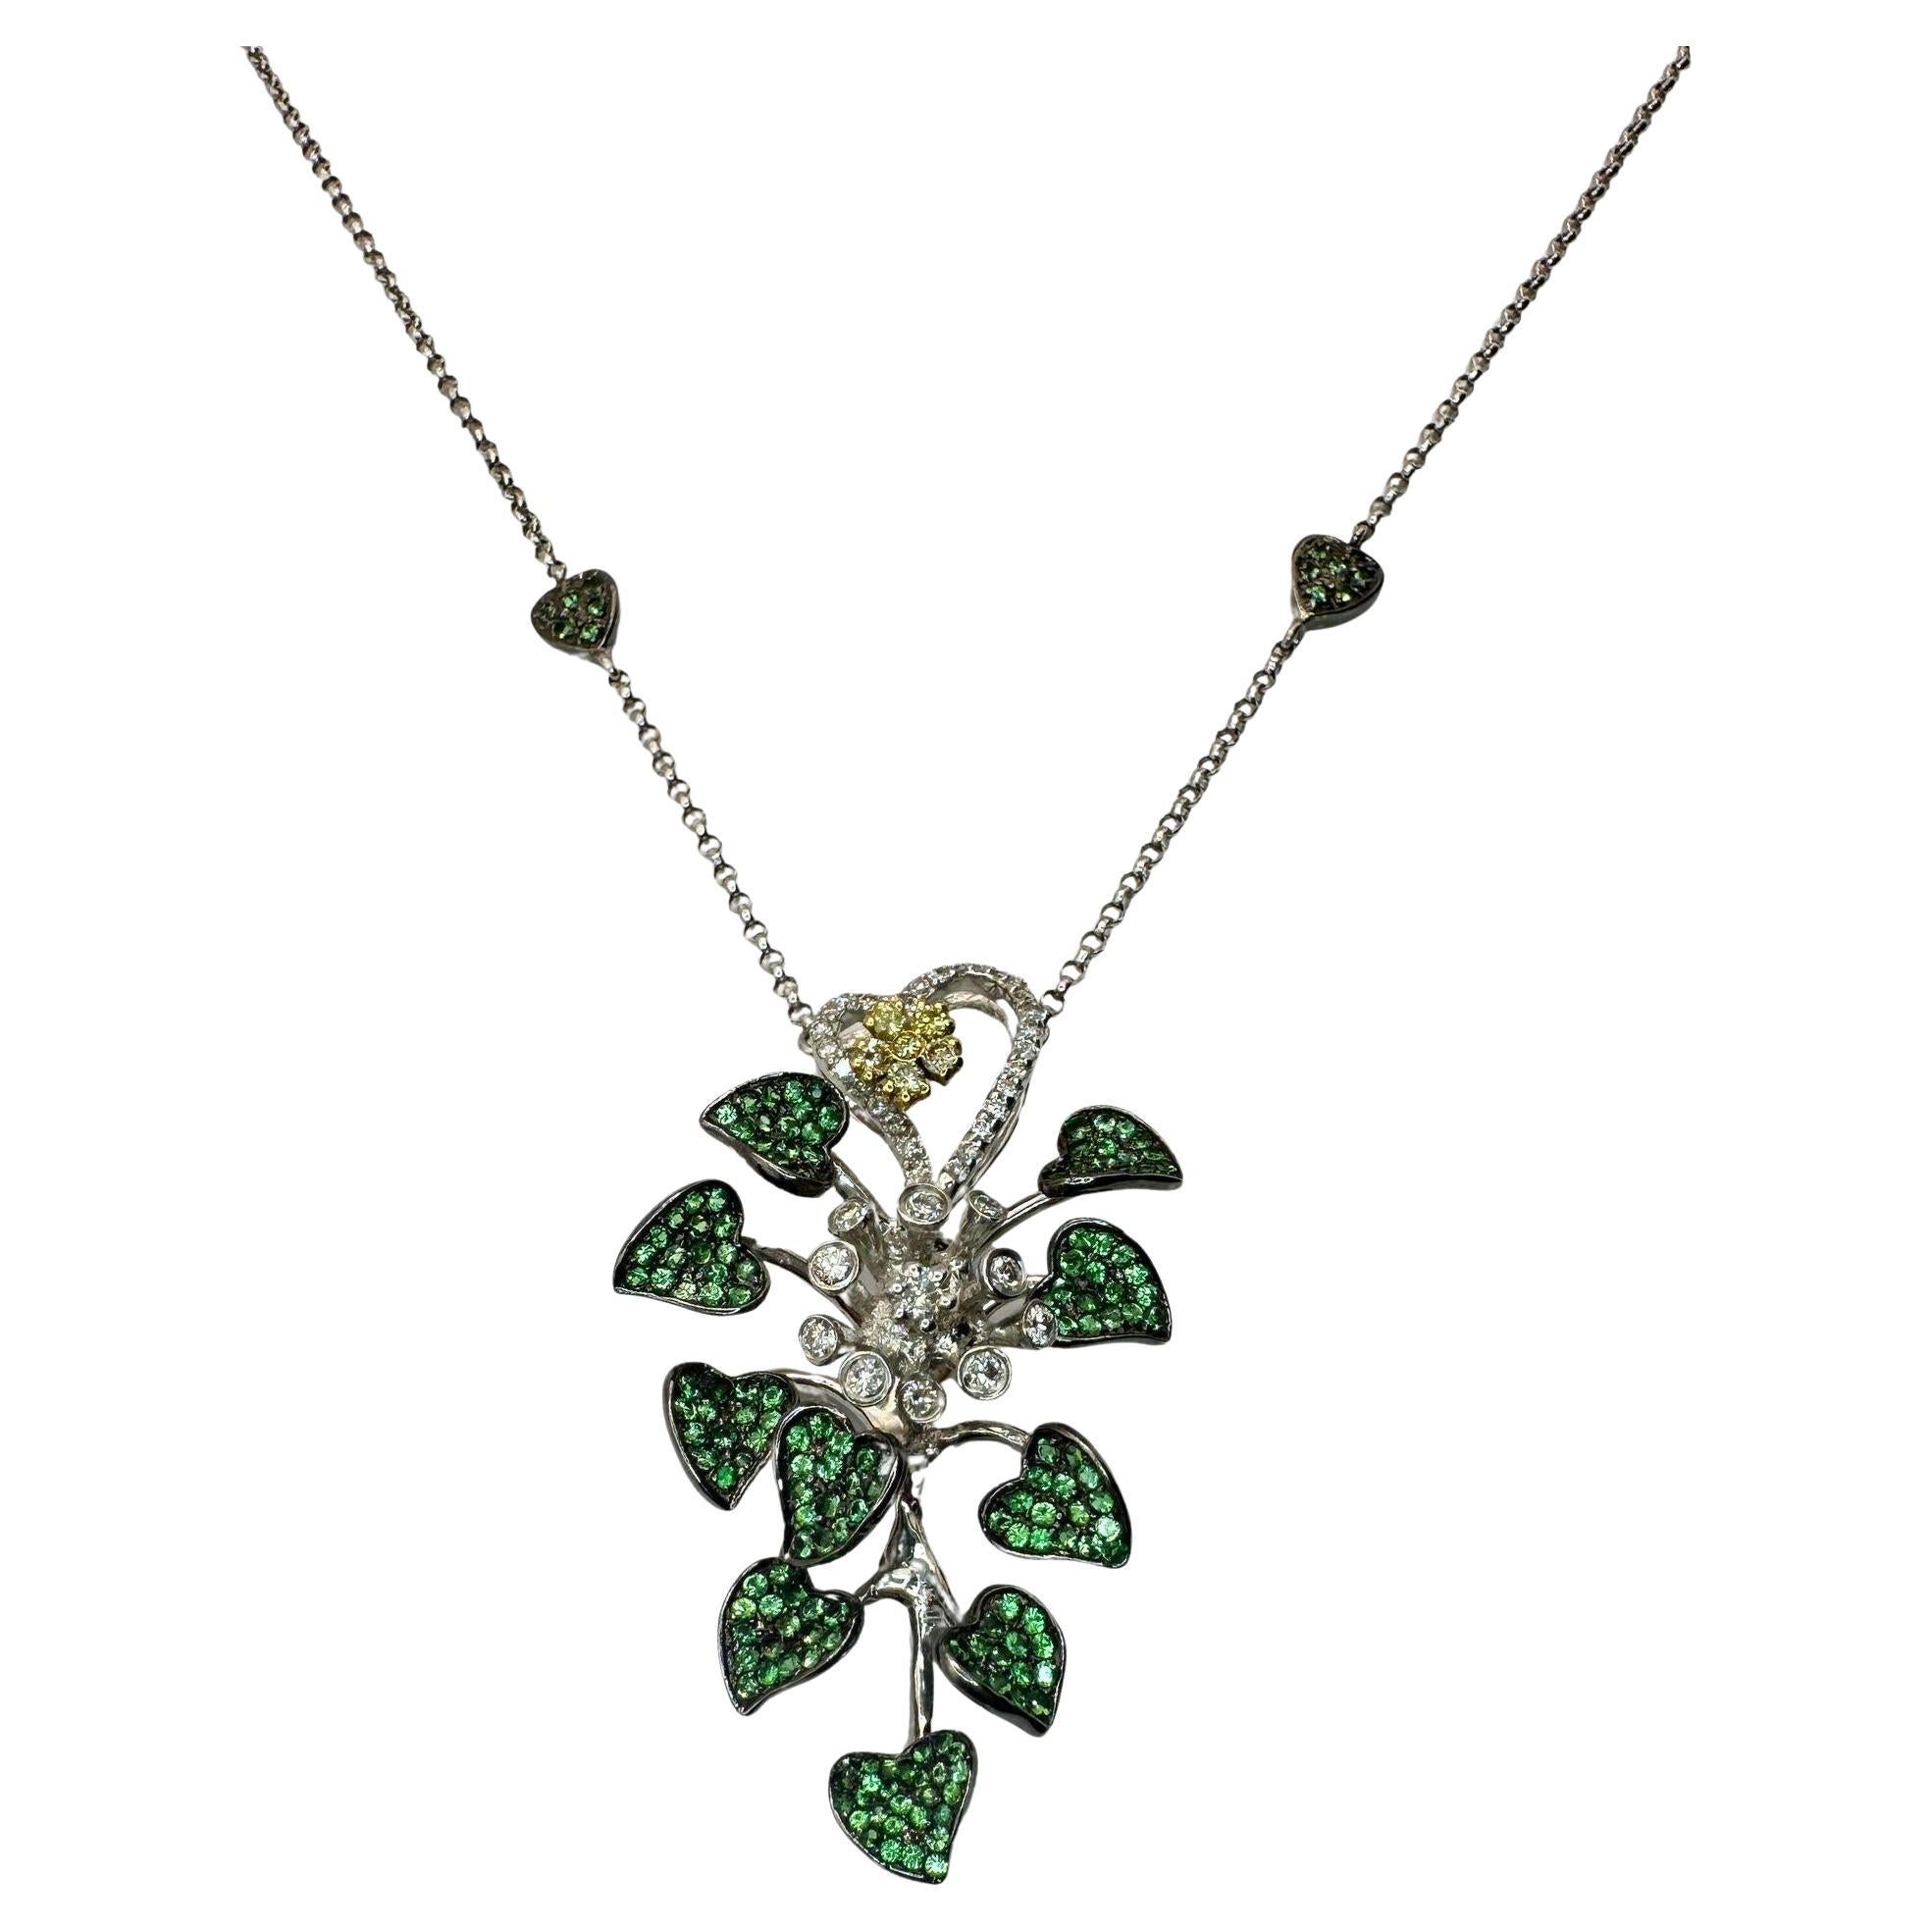 18k White and Yellow Diamond and Green Garnet Necklace